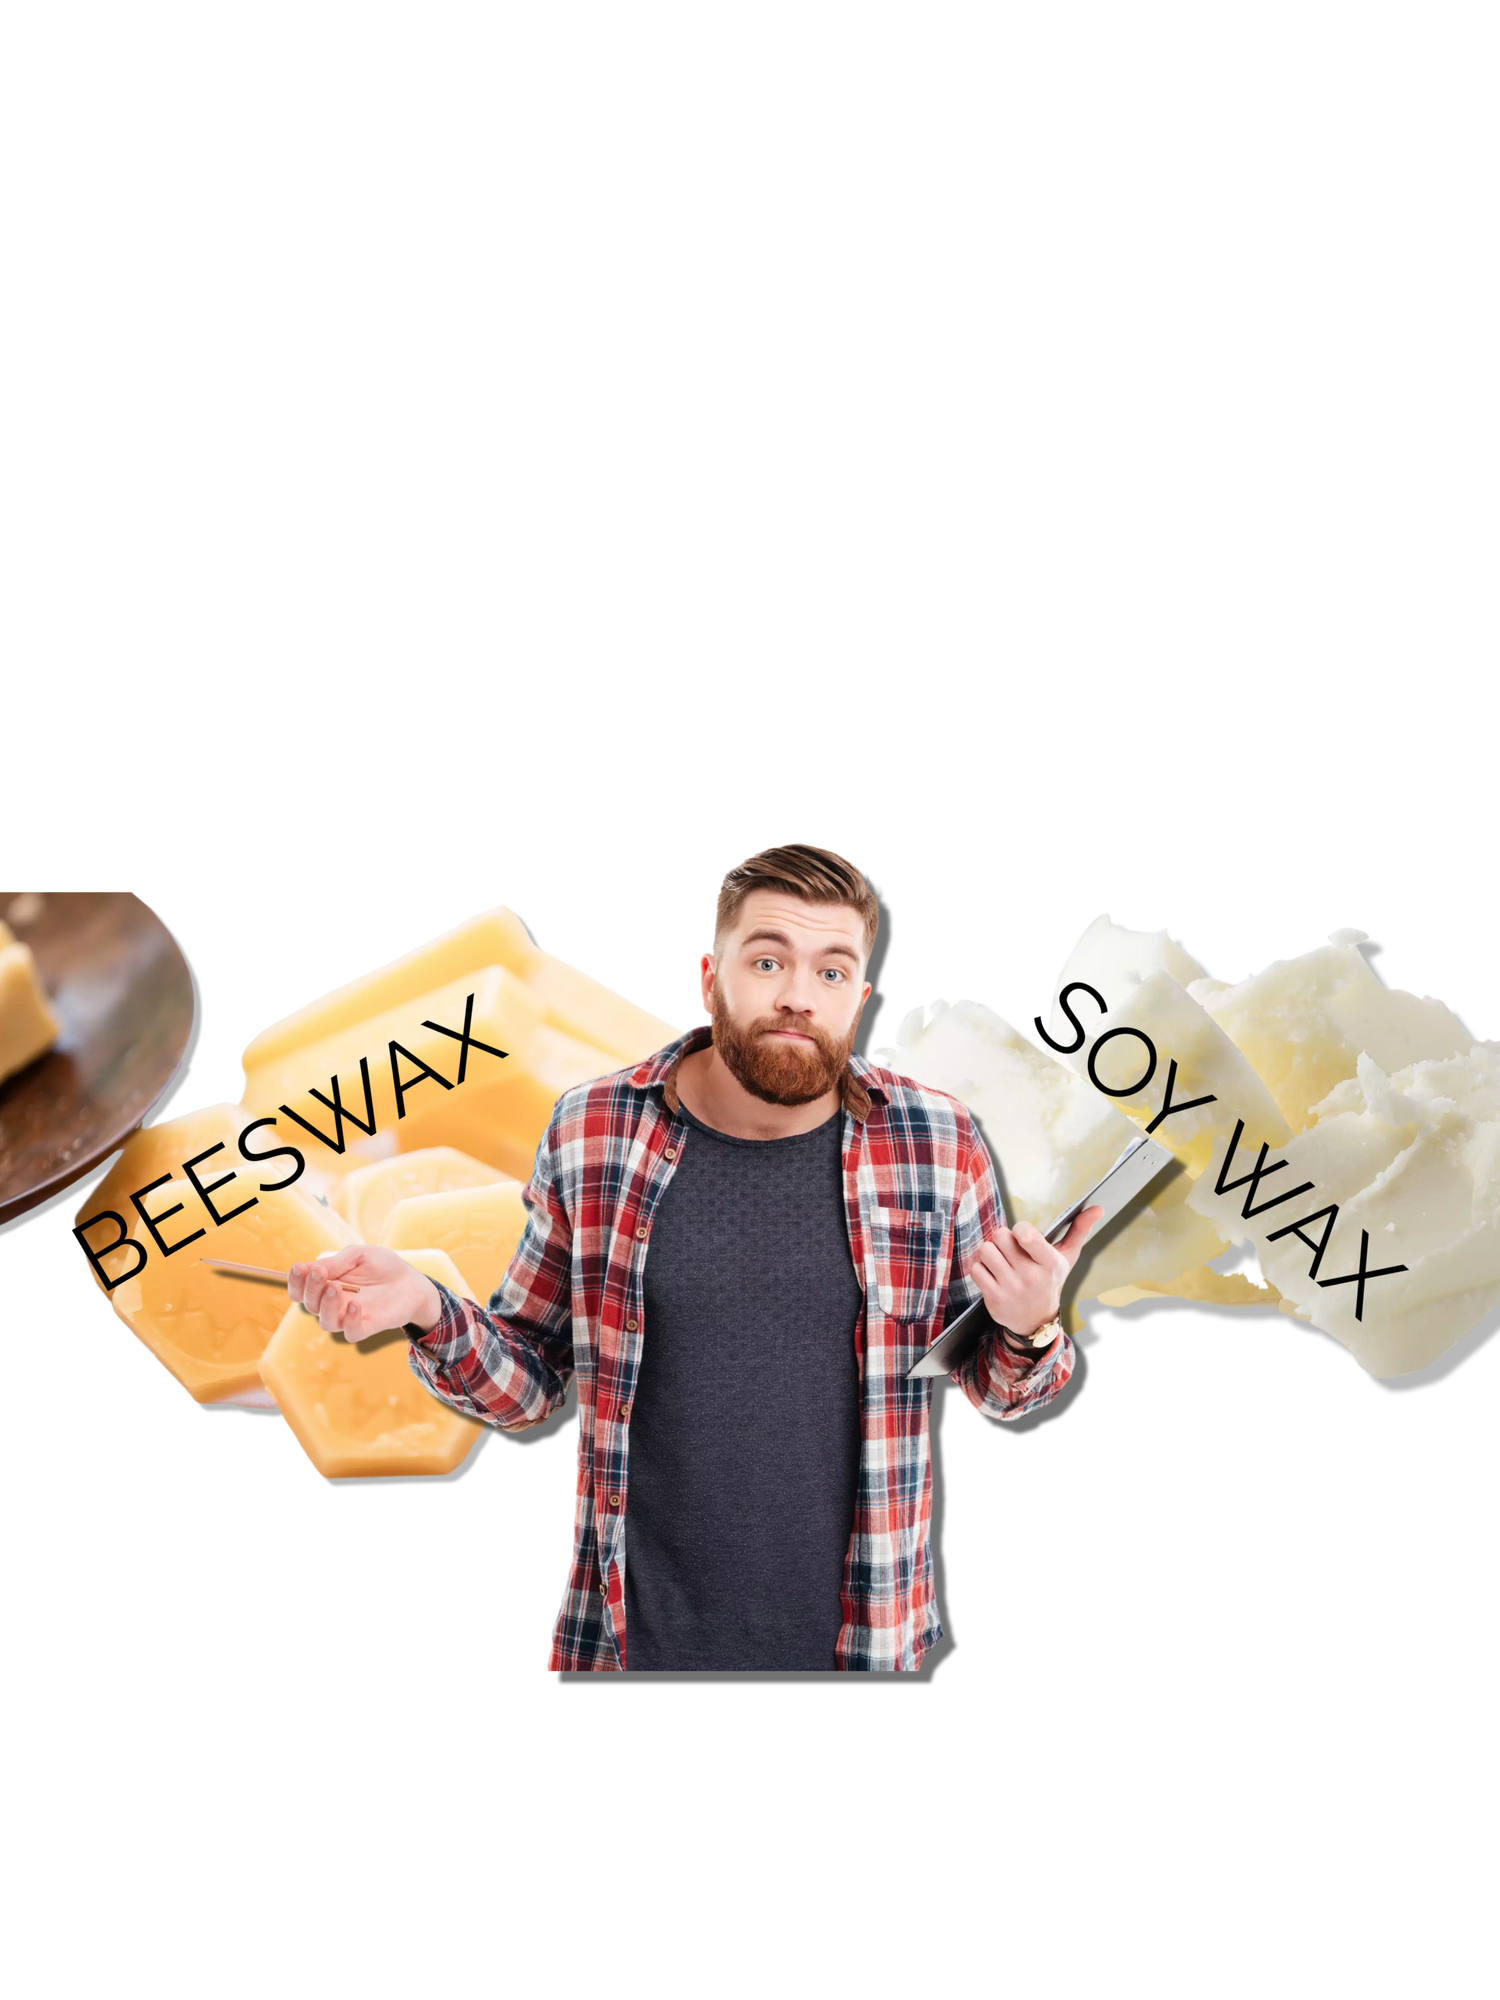 Beeswax vs. Soy Wax for Beard Balm: The Positives and Negatives of Each